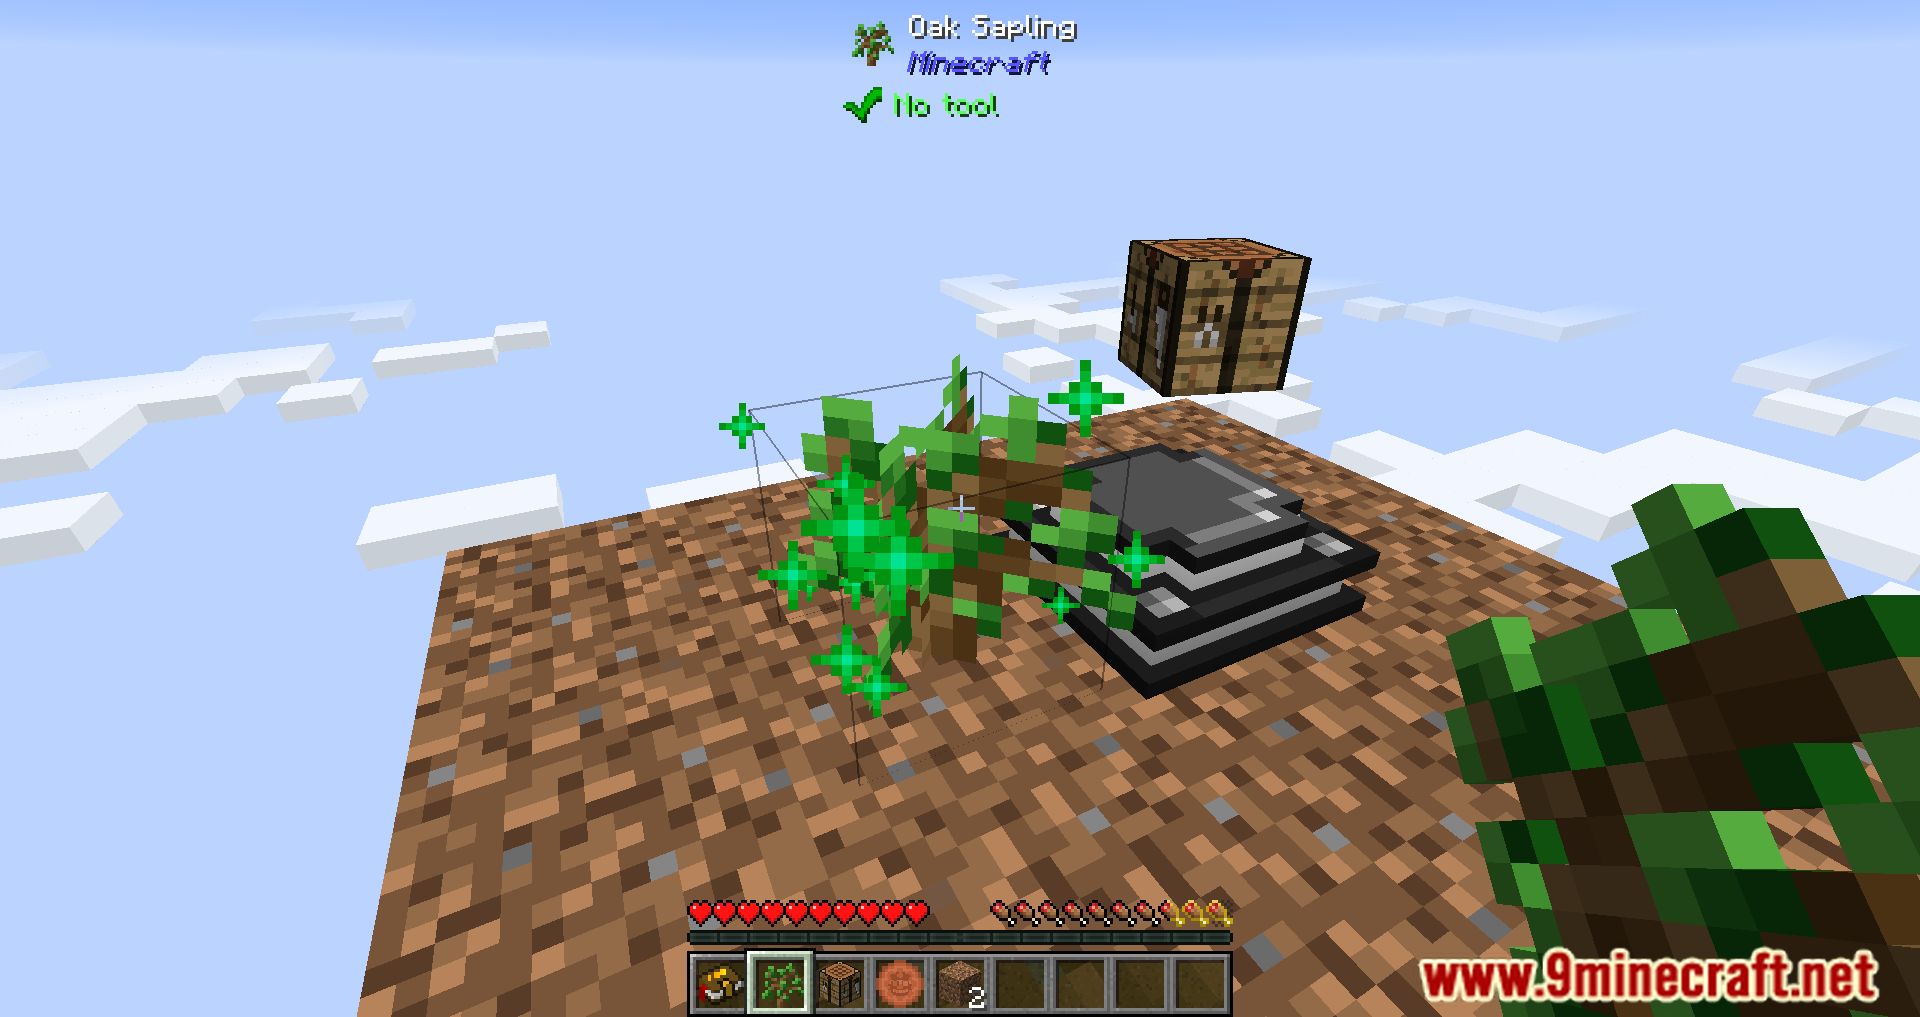 GregBlock Modpack (1.12.2) - A Skyblock Based Around Automation 15